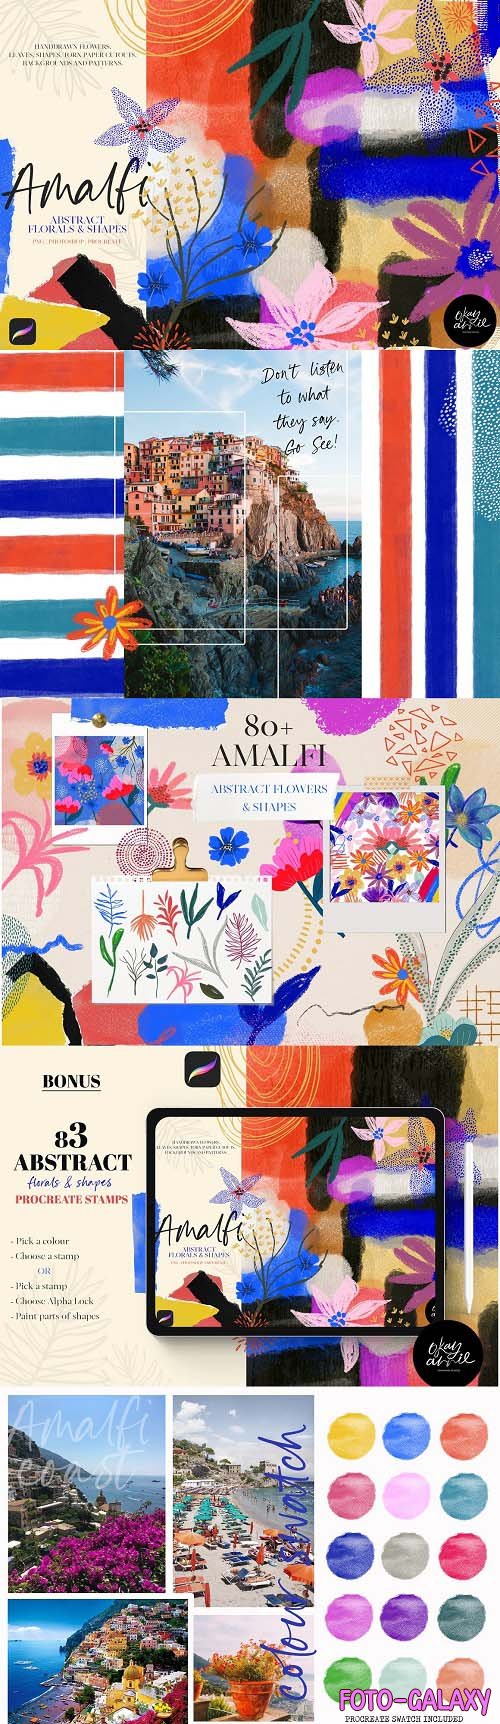 Amalfi: Abstract Floral & Shapes - 6114865